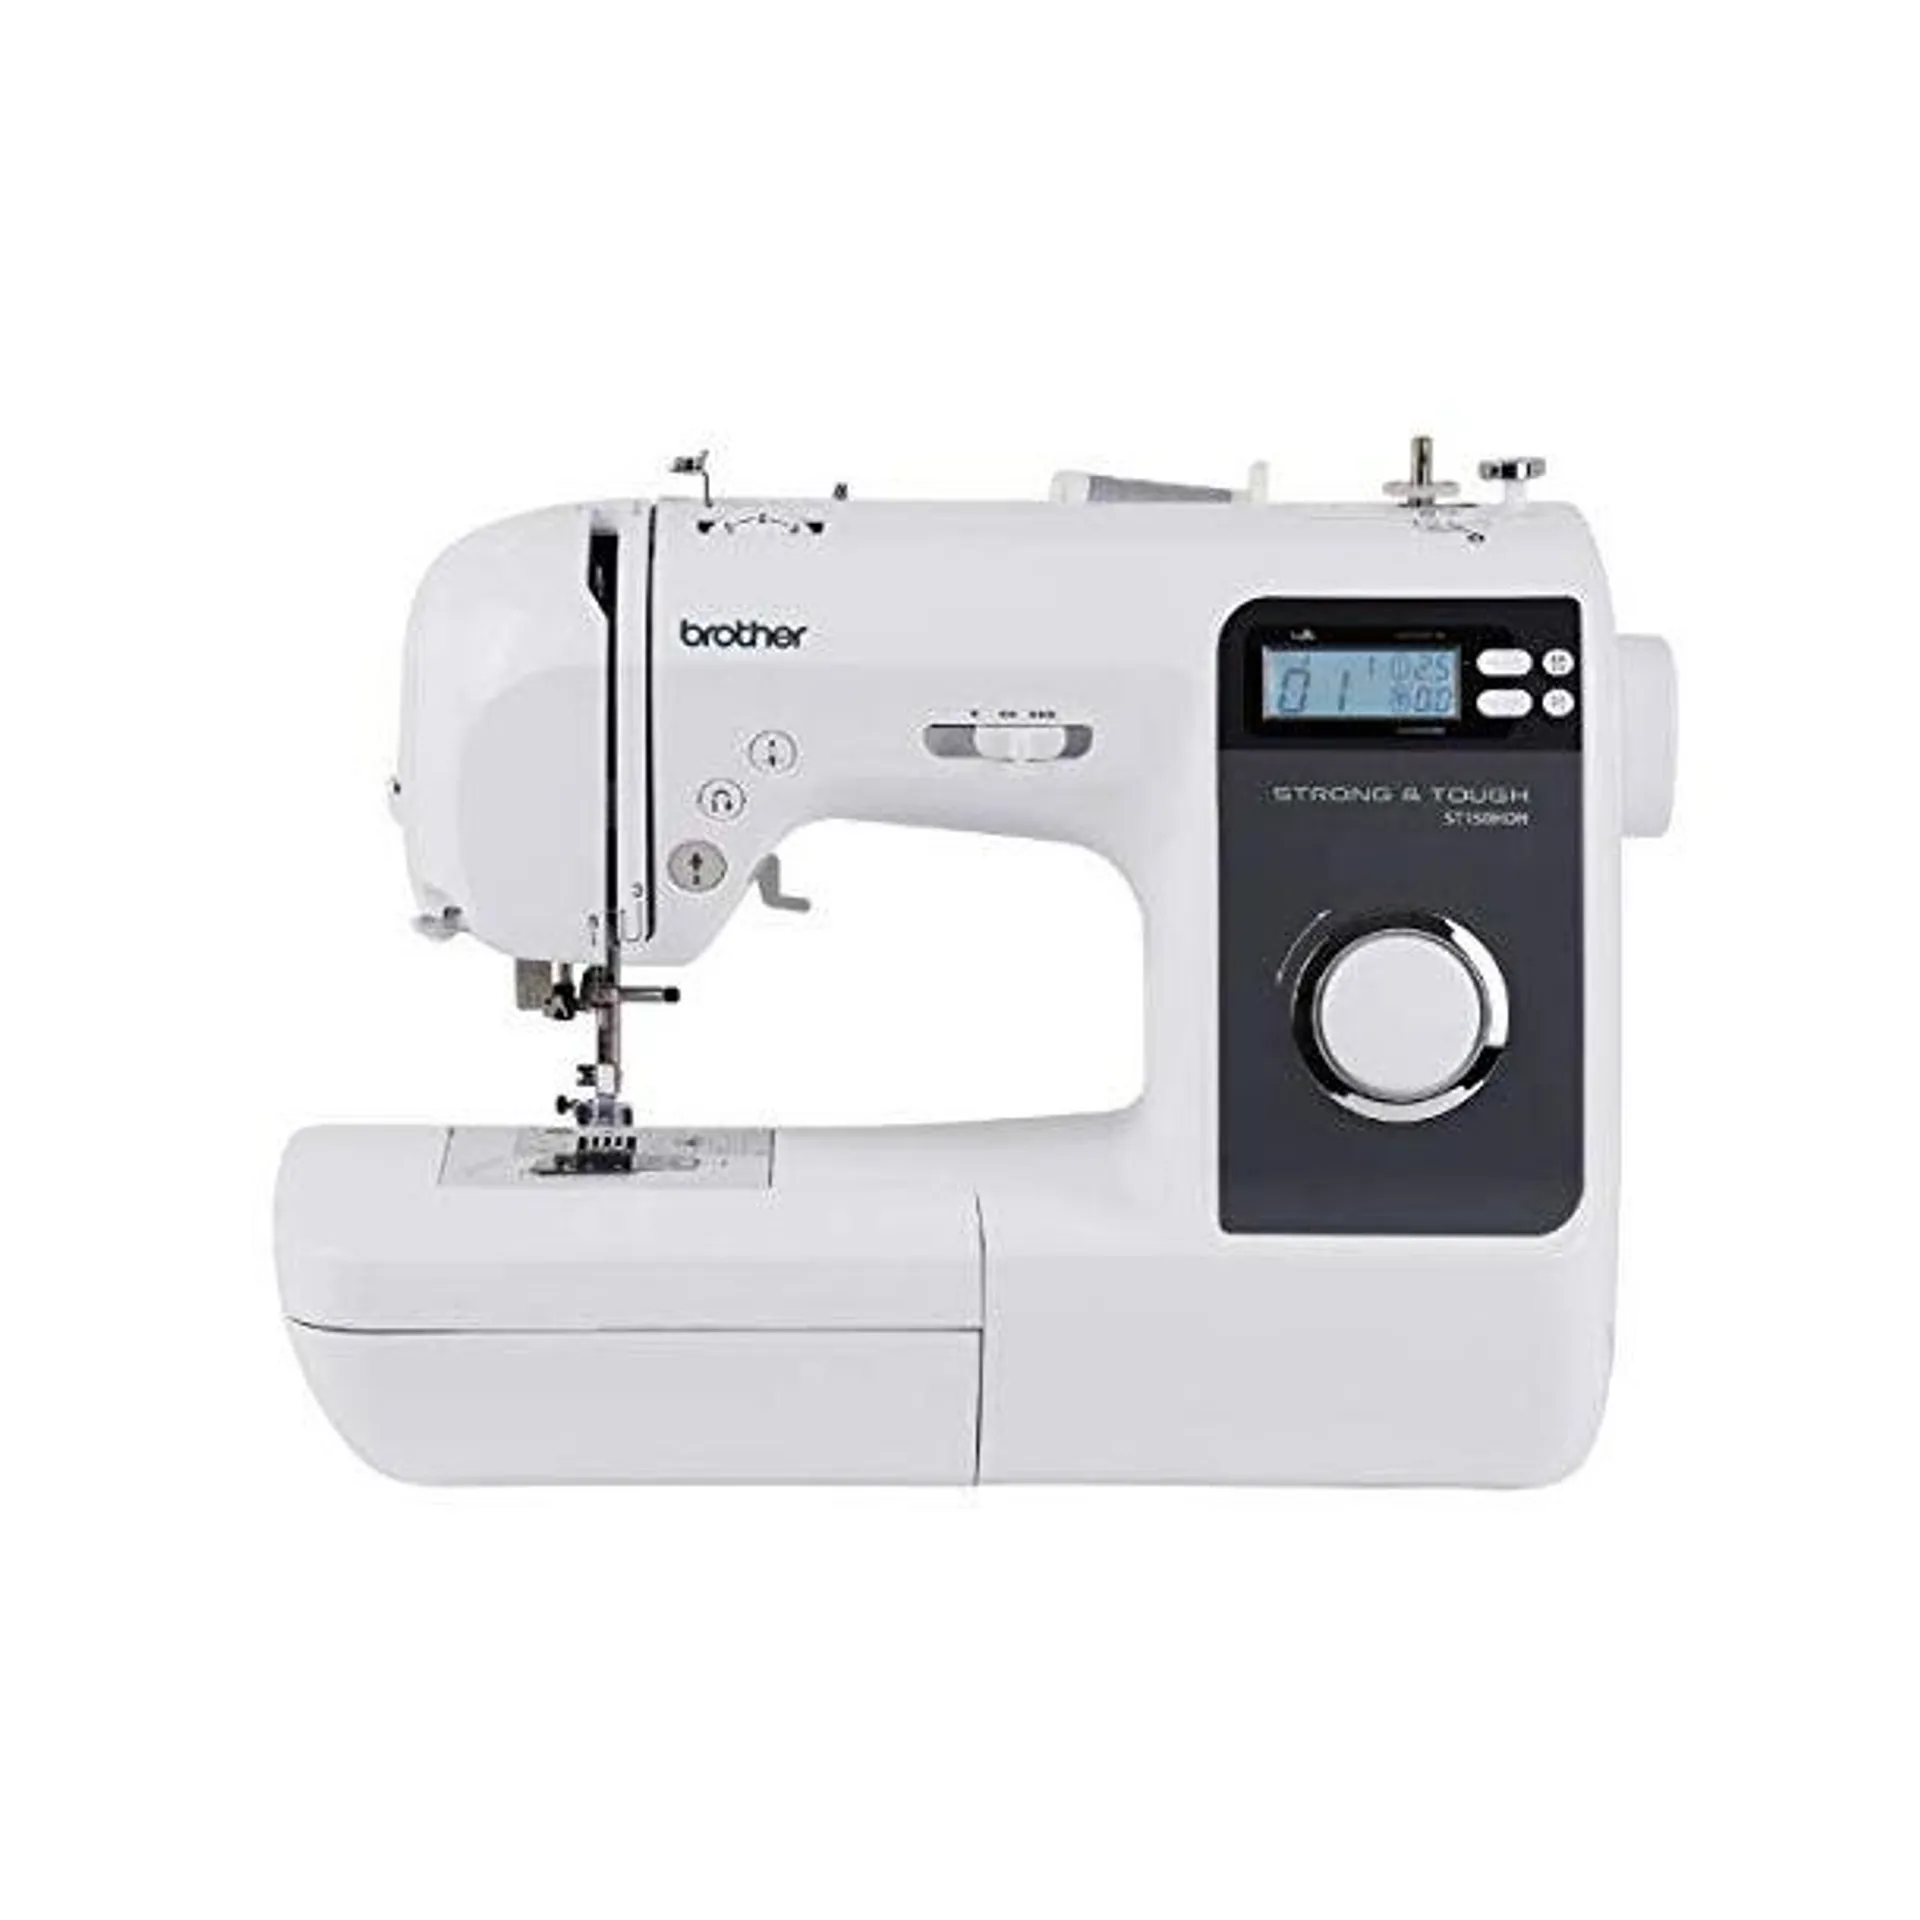 Brother ST150HDH Sewing Machine with LCD Display - White